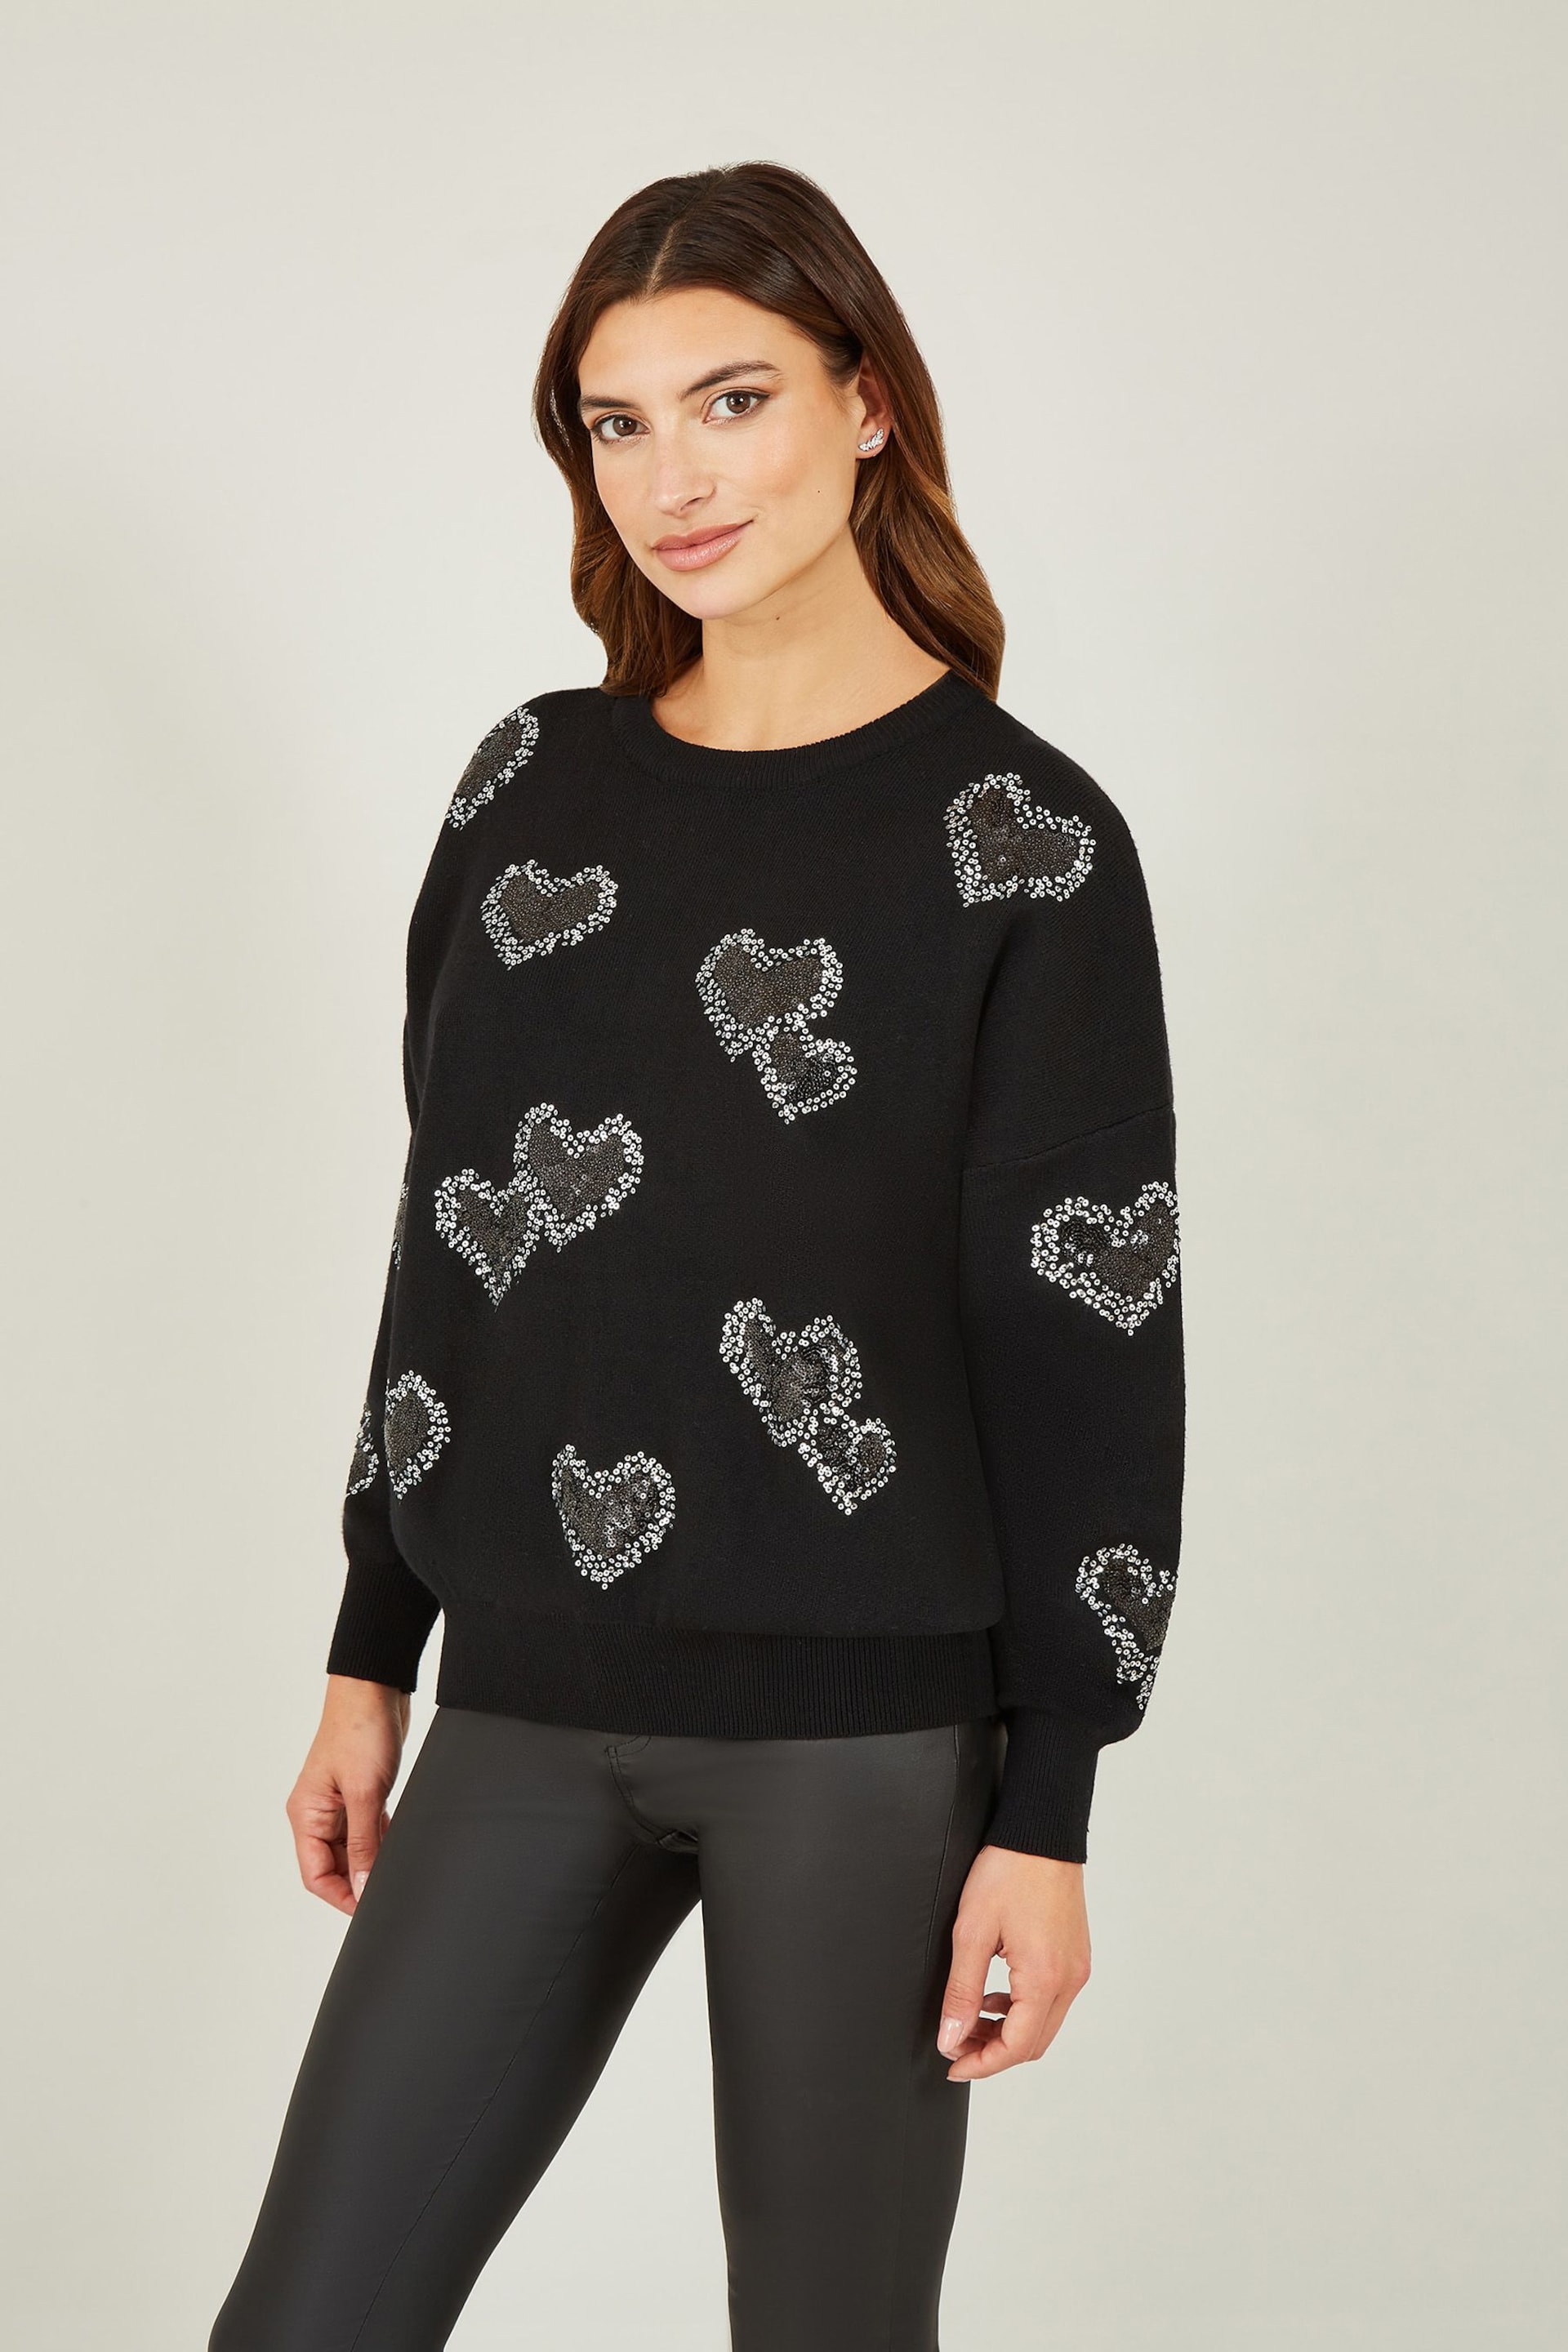 Yumi Black Sequin Heart Relaxed Jumper - Image 1 of 3